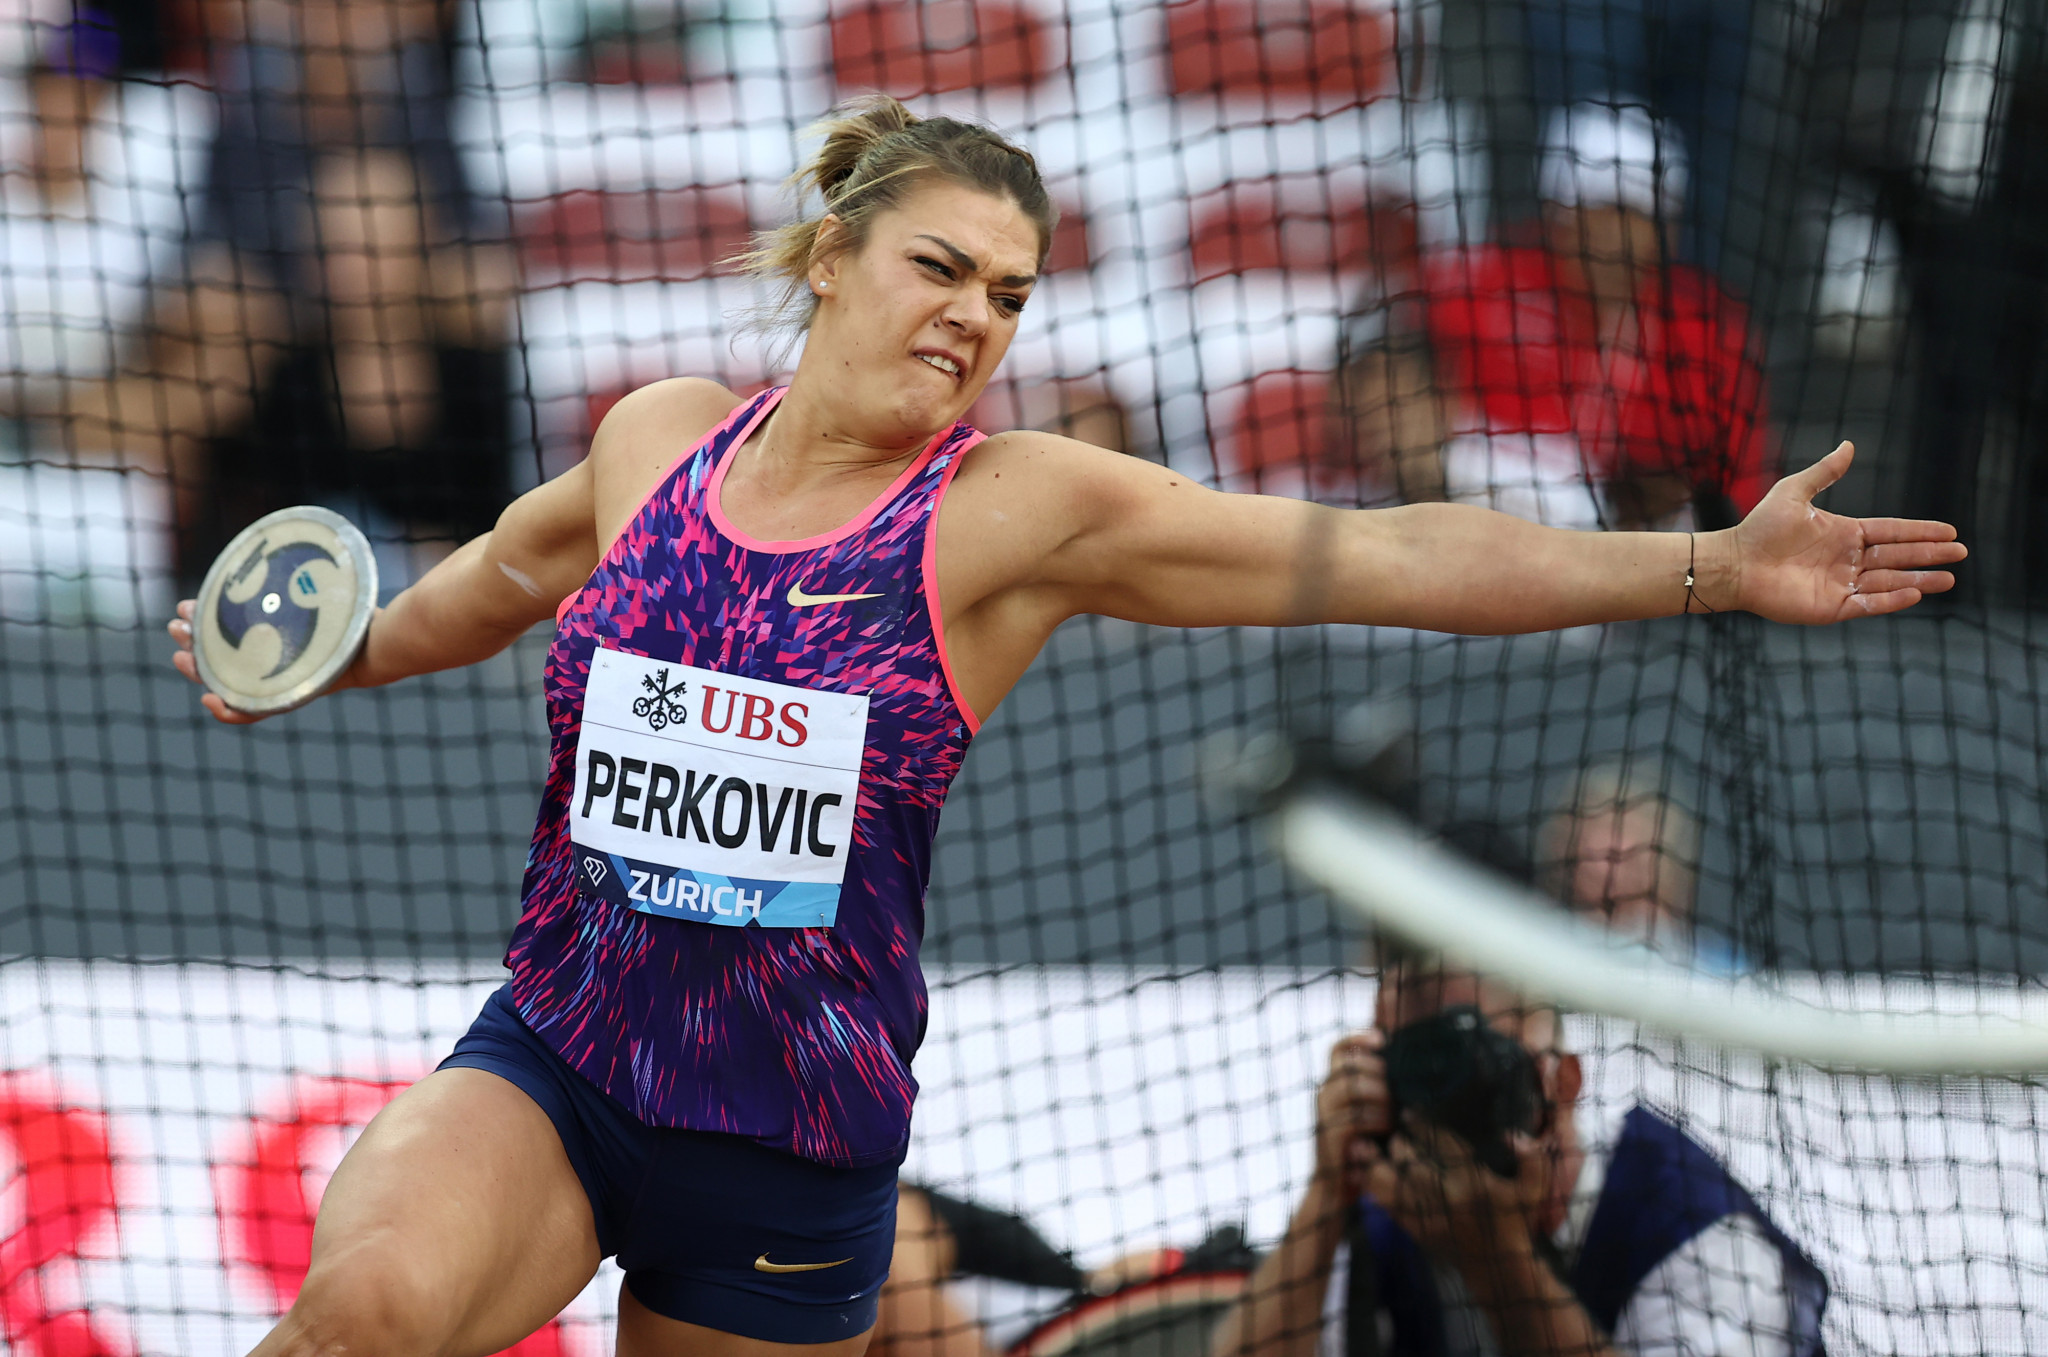 Two-time world champion Sandra Perković will look to bounce back on home soil after losing her Olympic title to Valarie Allman ©Getty Images